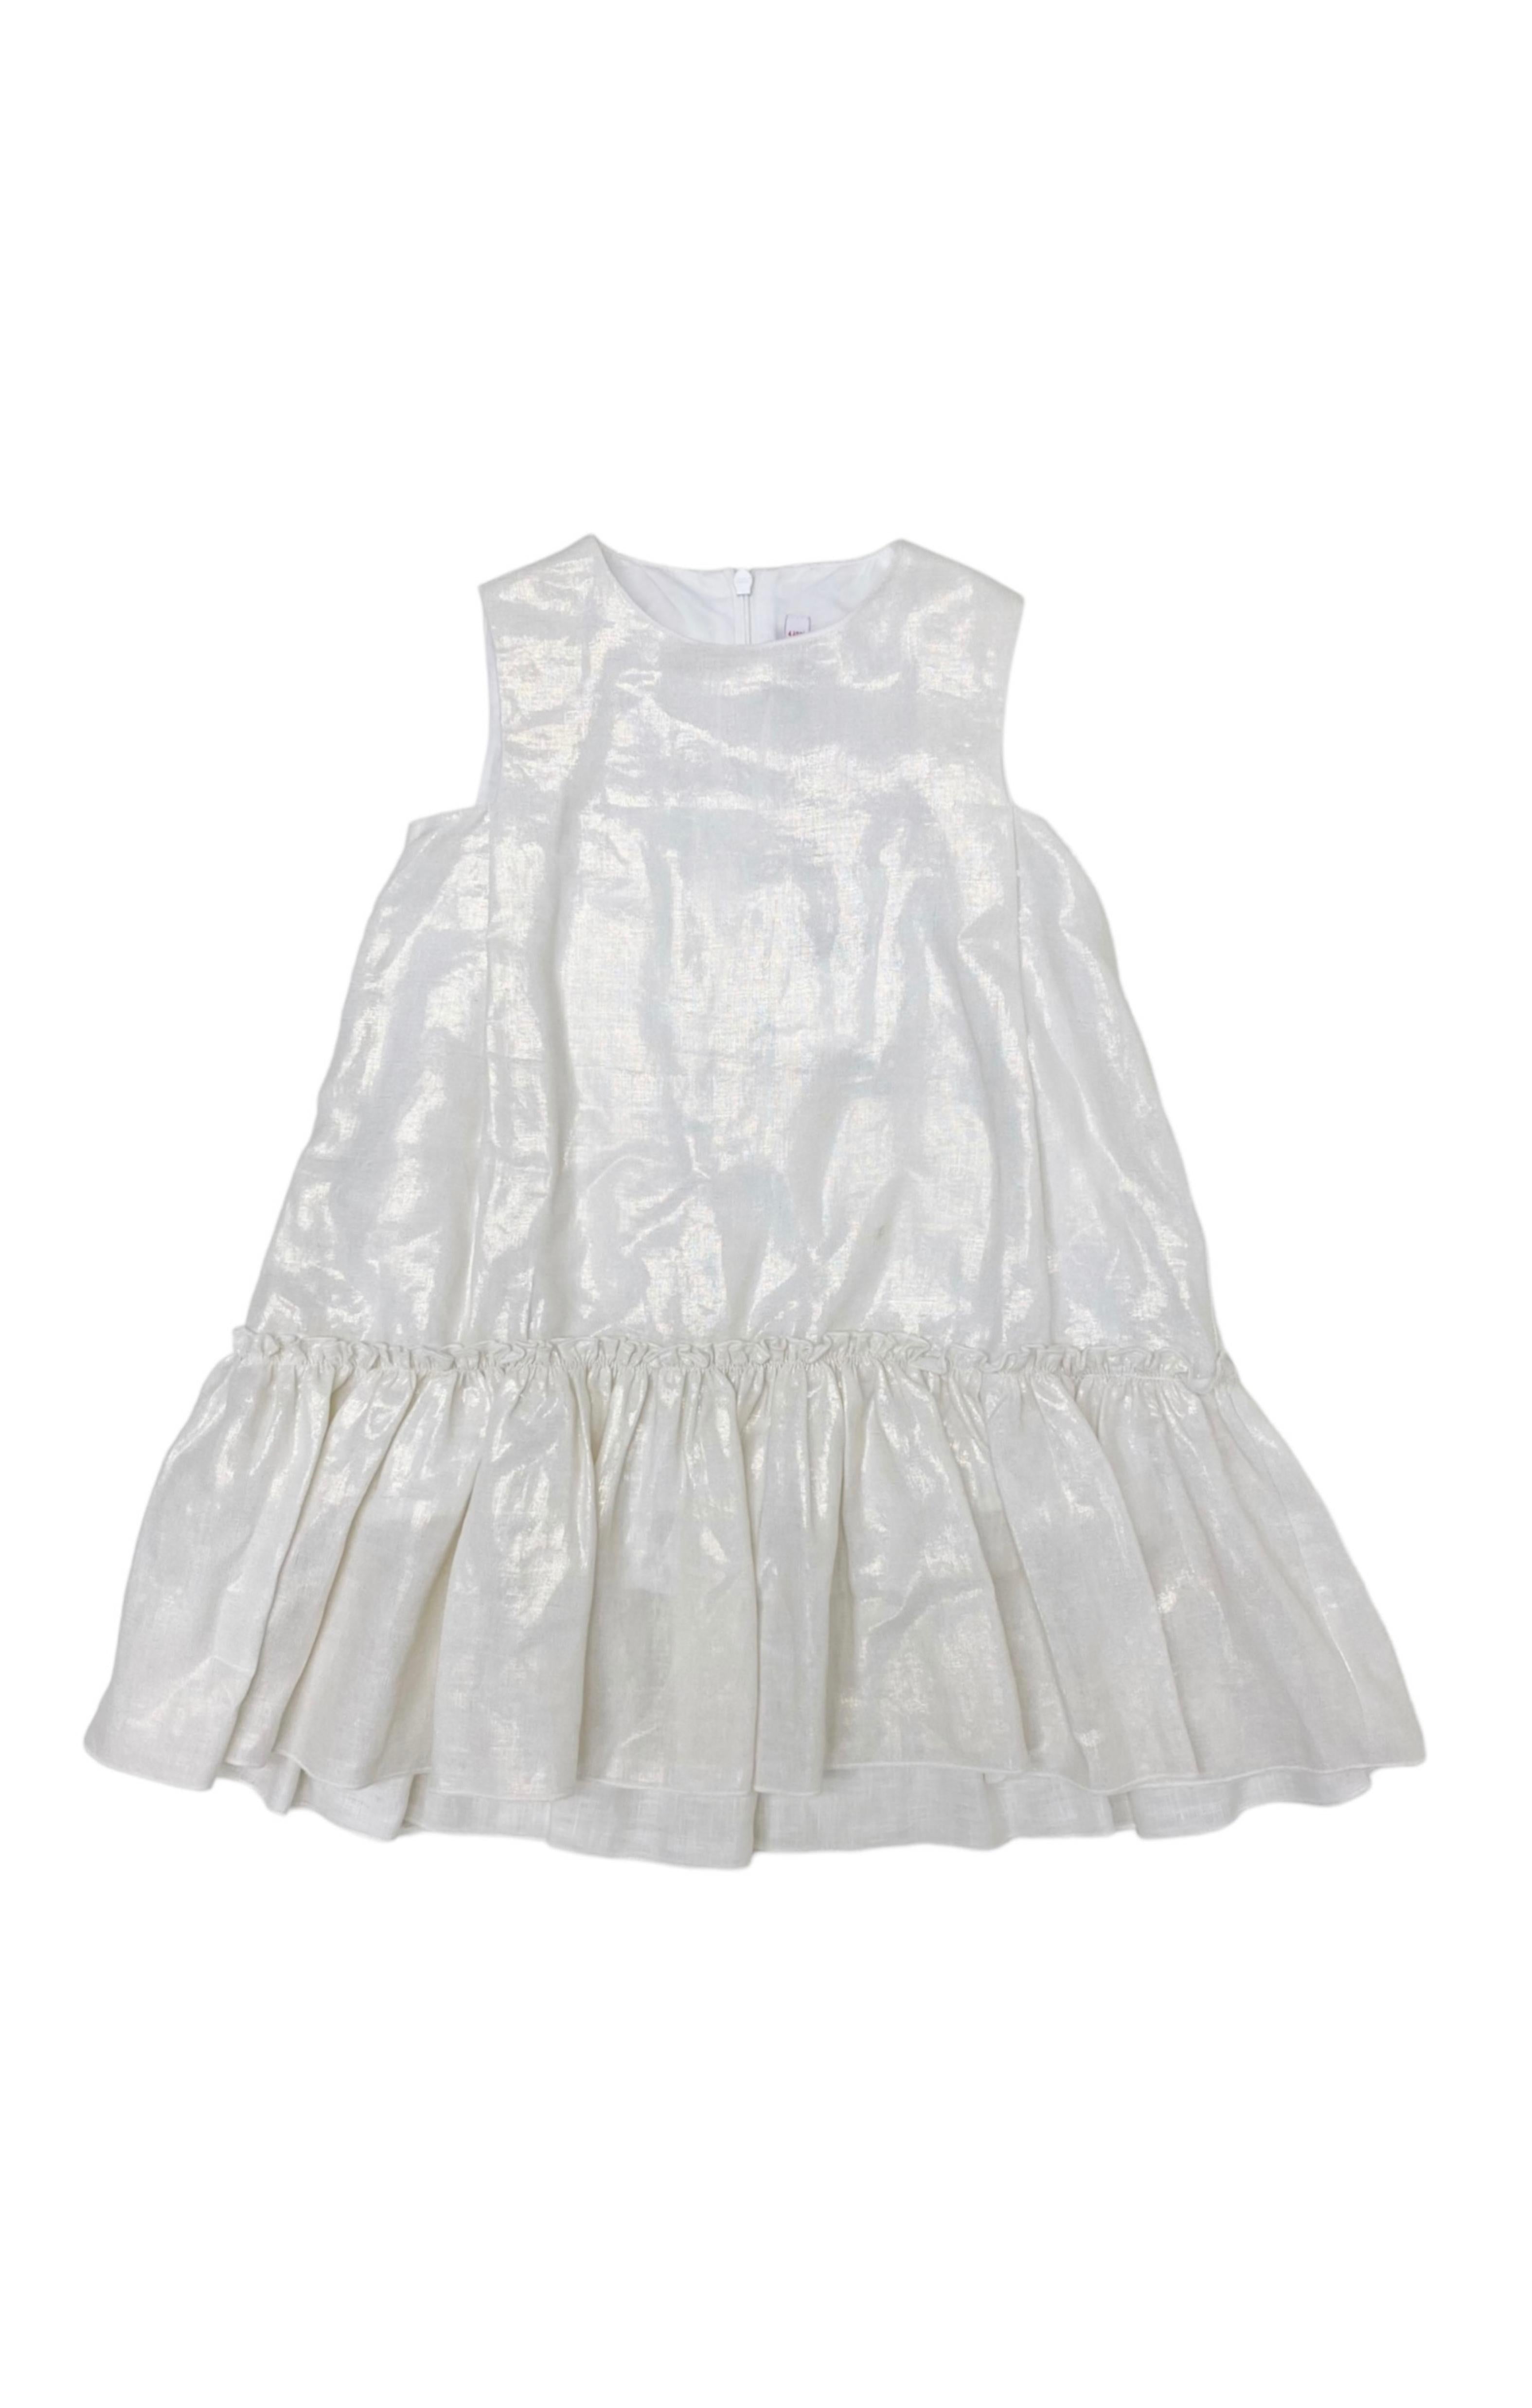 IL GUFO (RARE & NEW) with tags Dress Size: 4 Years